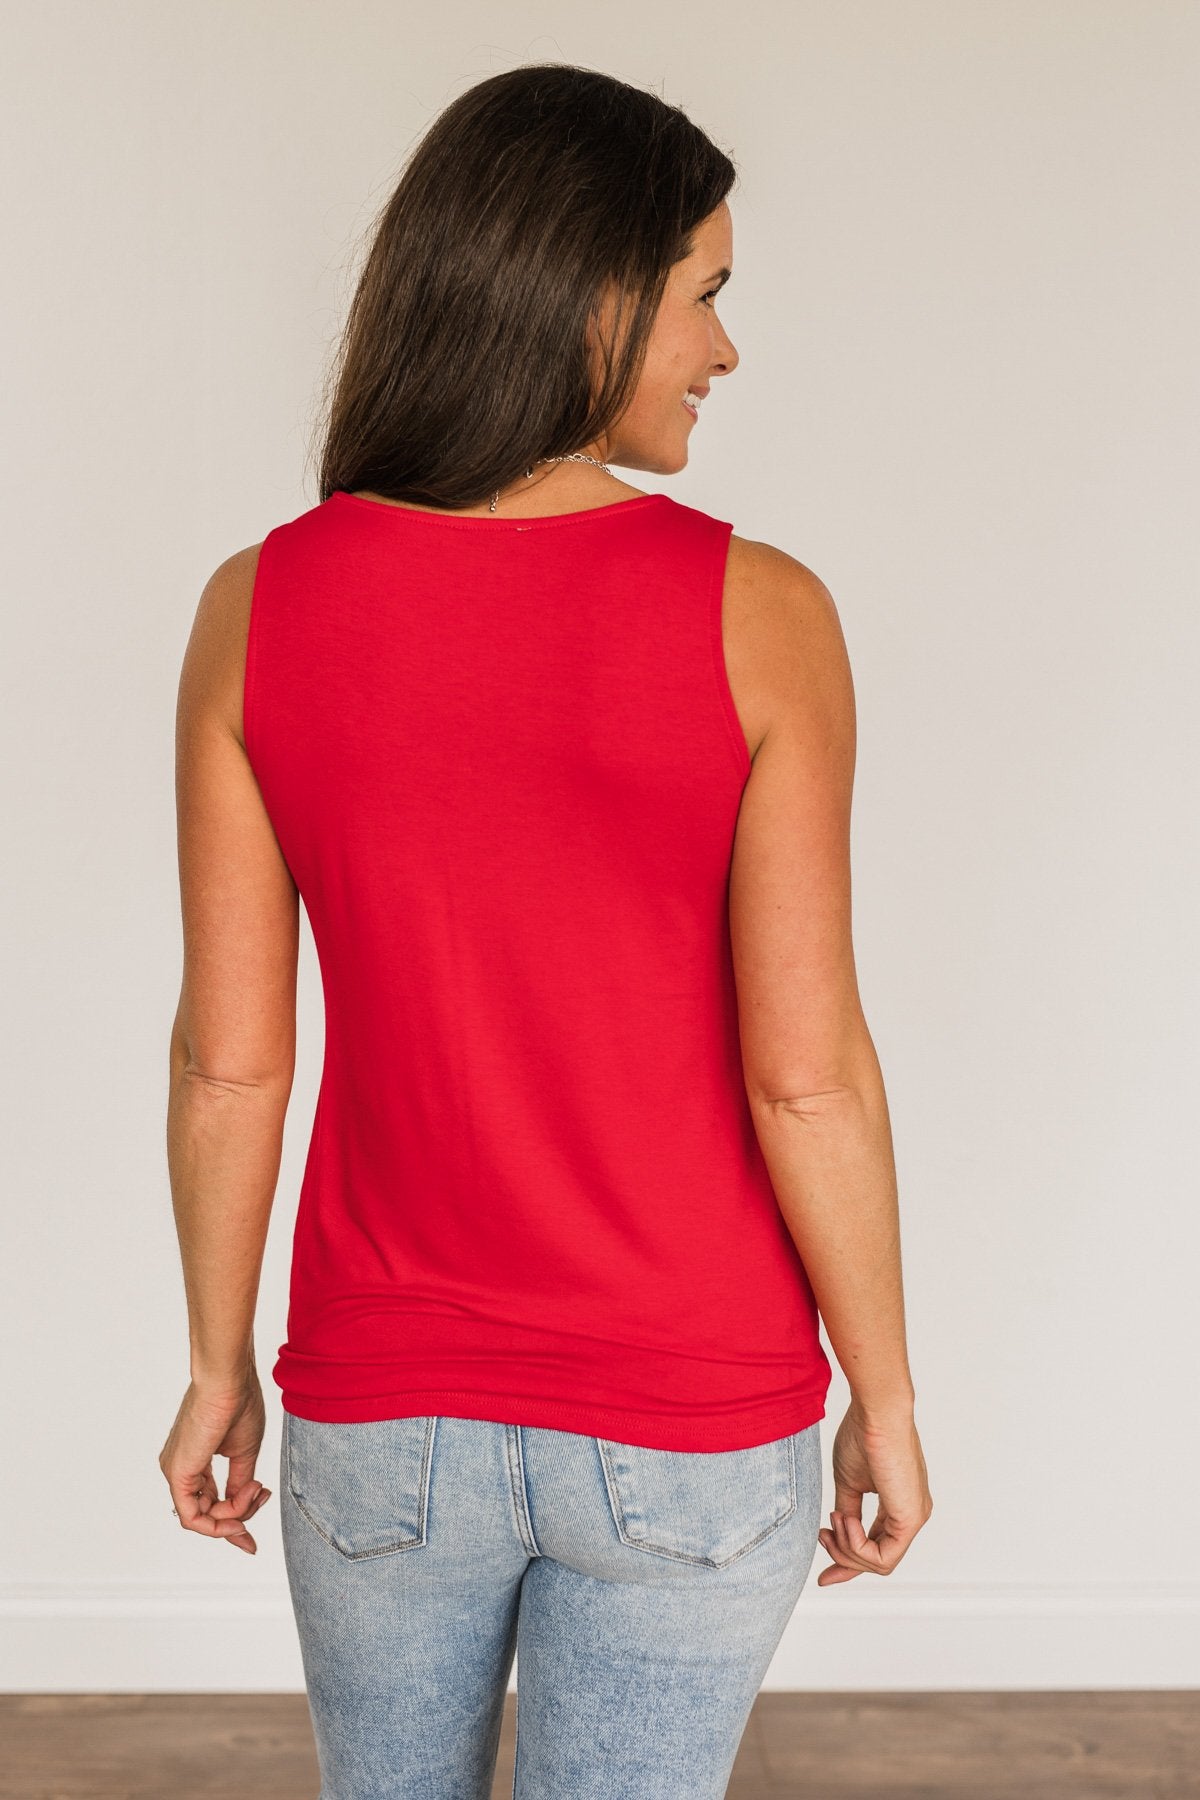 Places to Go Criss Cross Tank Top- Red